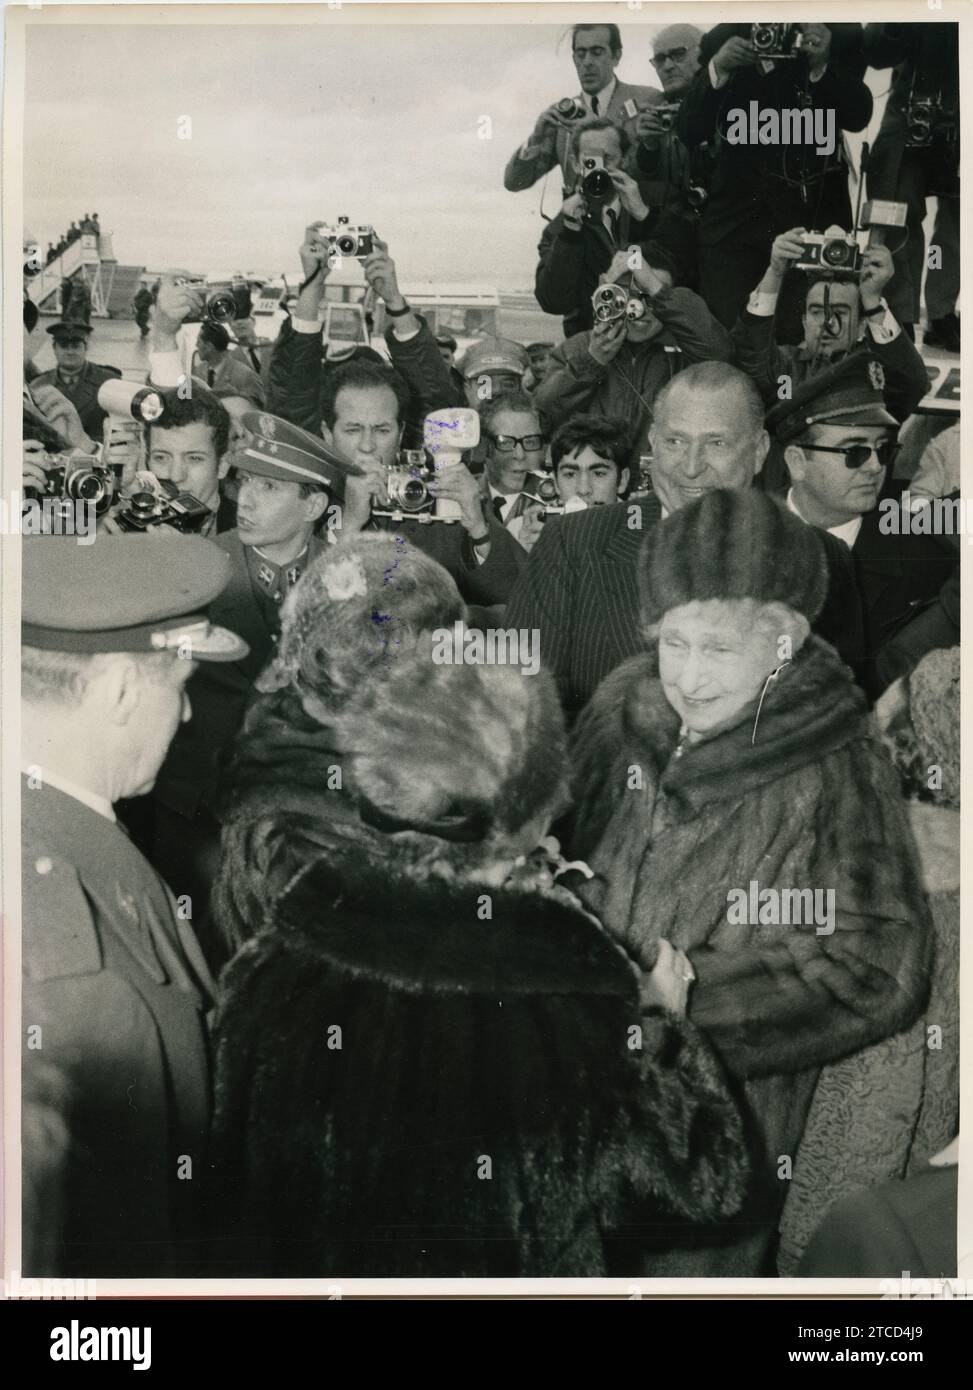 Madrid, 02/07/1968. Queen Victoria Eugenia visits Madrid on the occasion of the birth of her great-grandson, the Infante Don Felipe. In the image, arrival at Barajas Airport. Behind, his son Don Juan de Borbón. Credit: Album / Archivo ABC / Teodoro Naranjo Domínguez,Manuel Sanz Bermejo Stock Photo